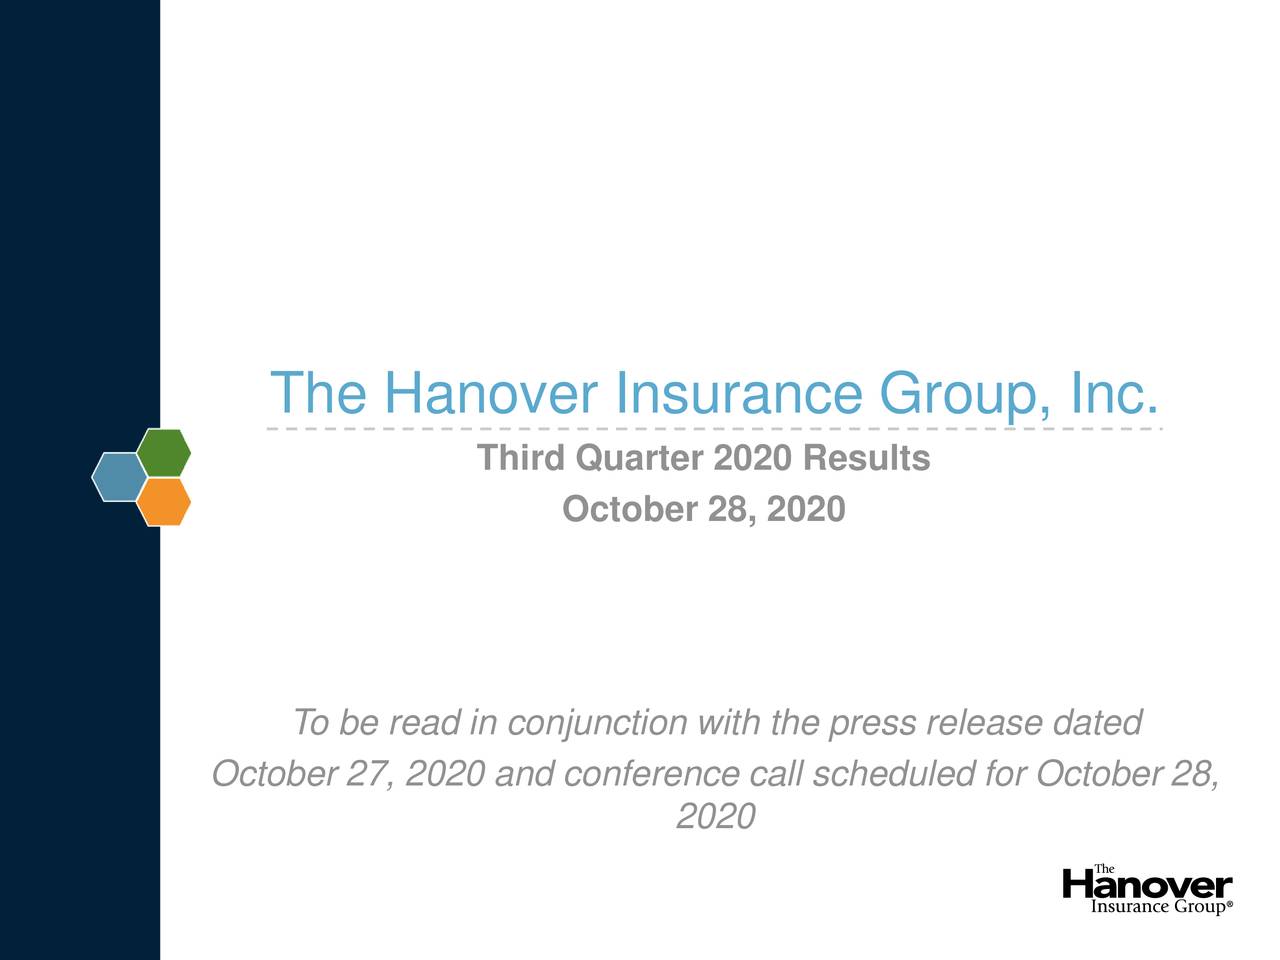 The Hanover Insurance Group, Inc. 2020 Q3 - Results - Earnings Call Presentation (NYSE:THG ...